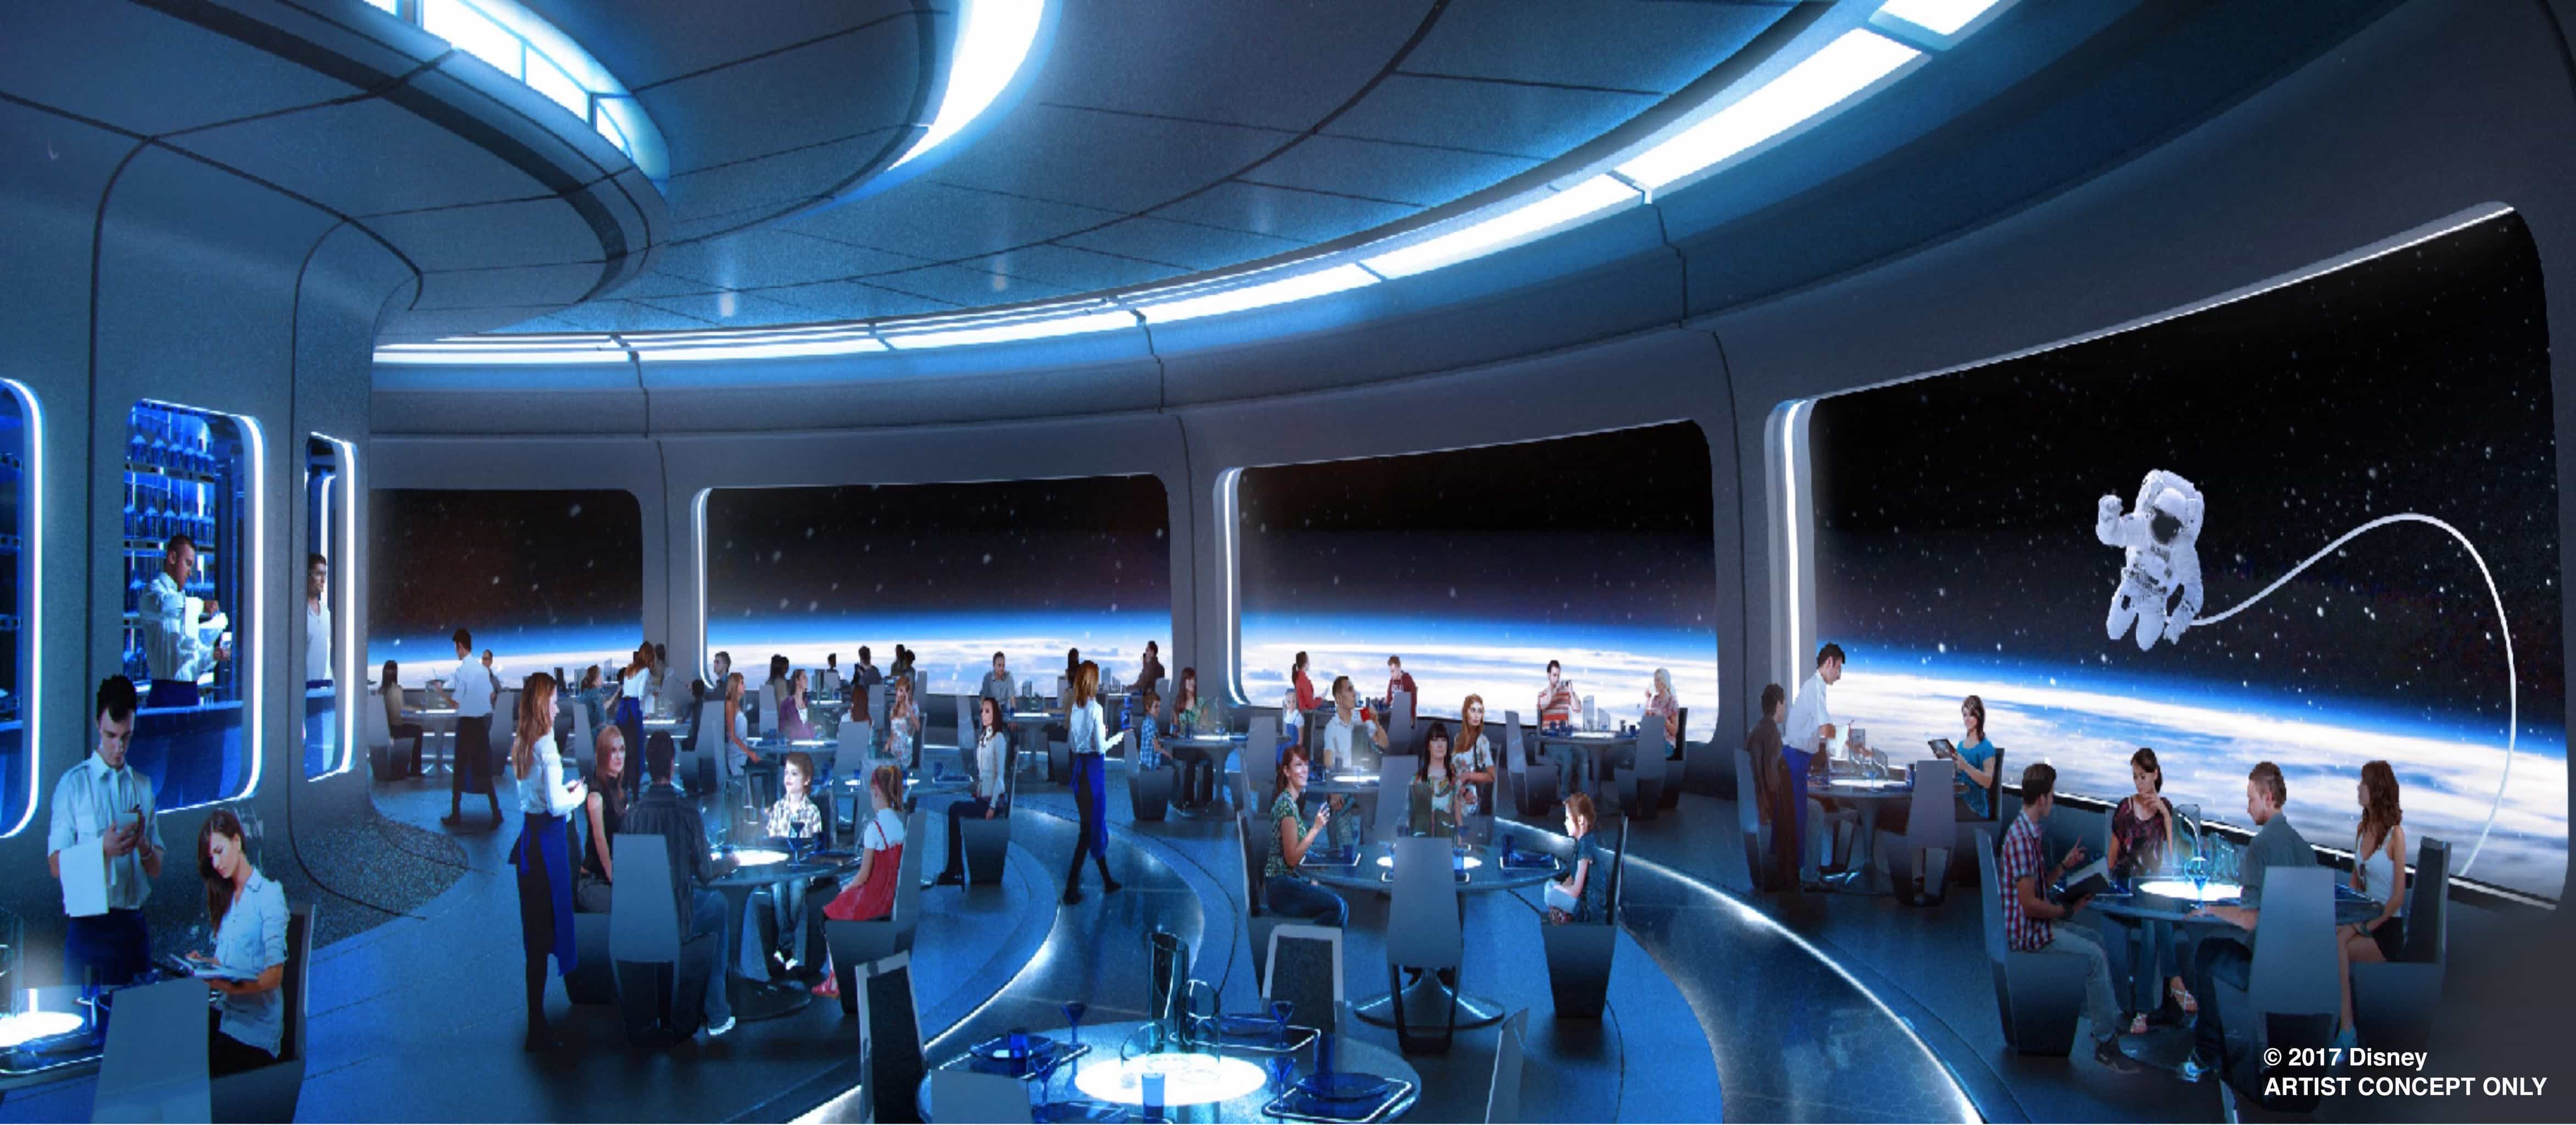 Epcot's new space-themed restaurant